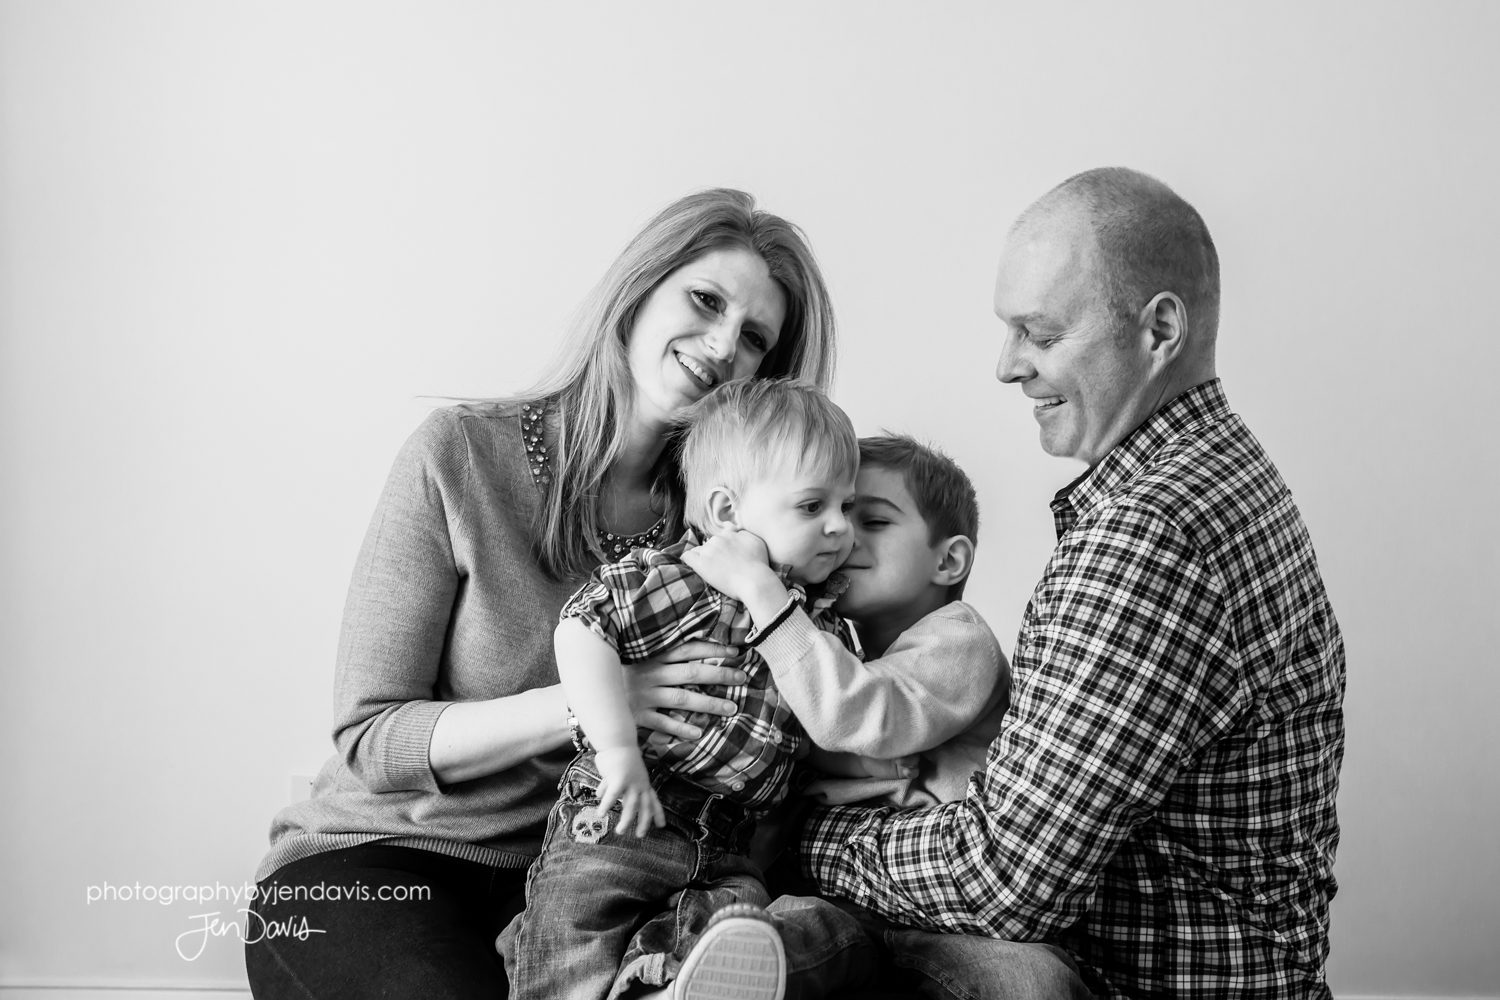 Simple portrait of a family of 4